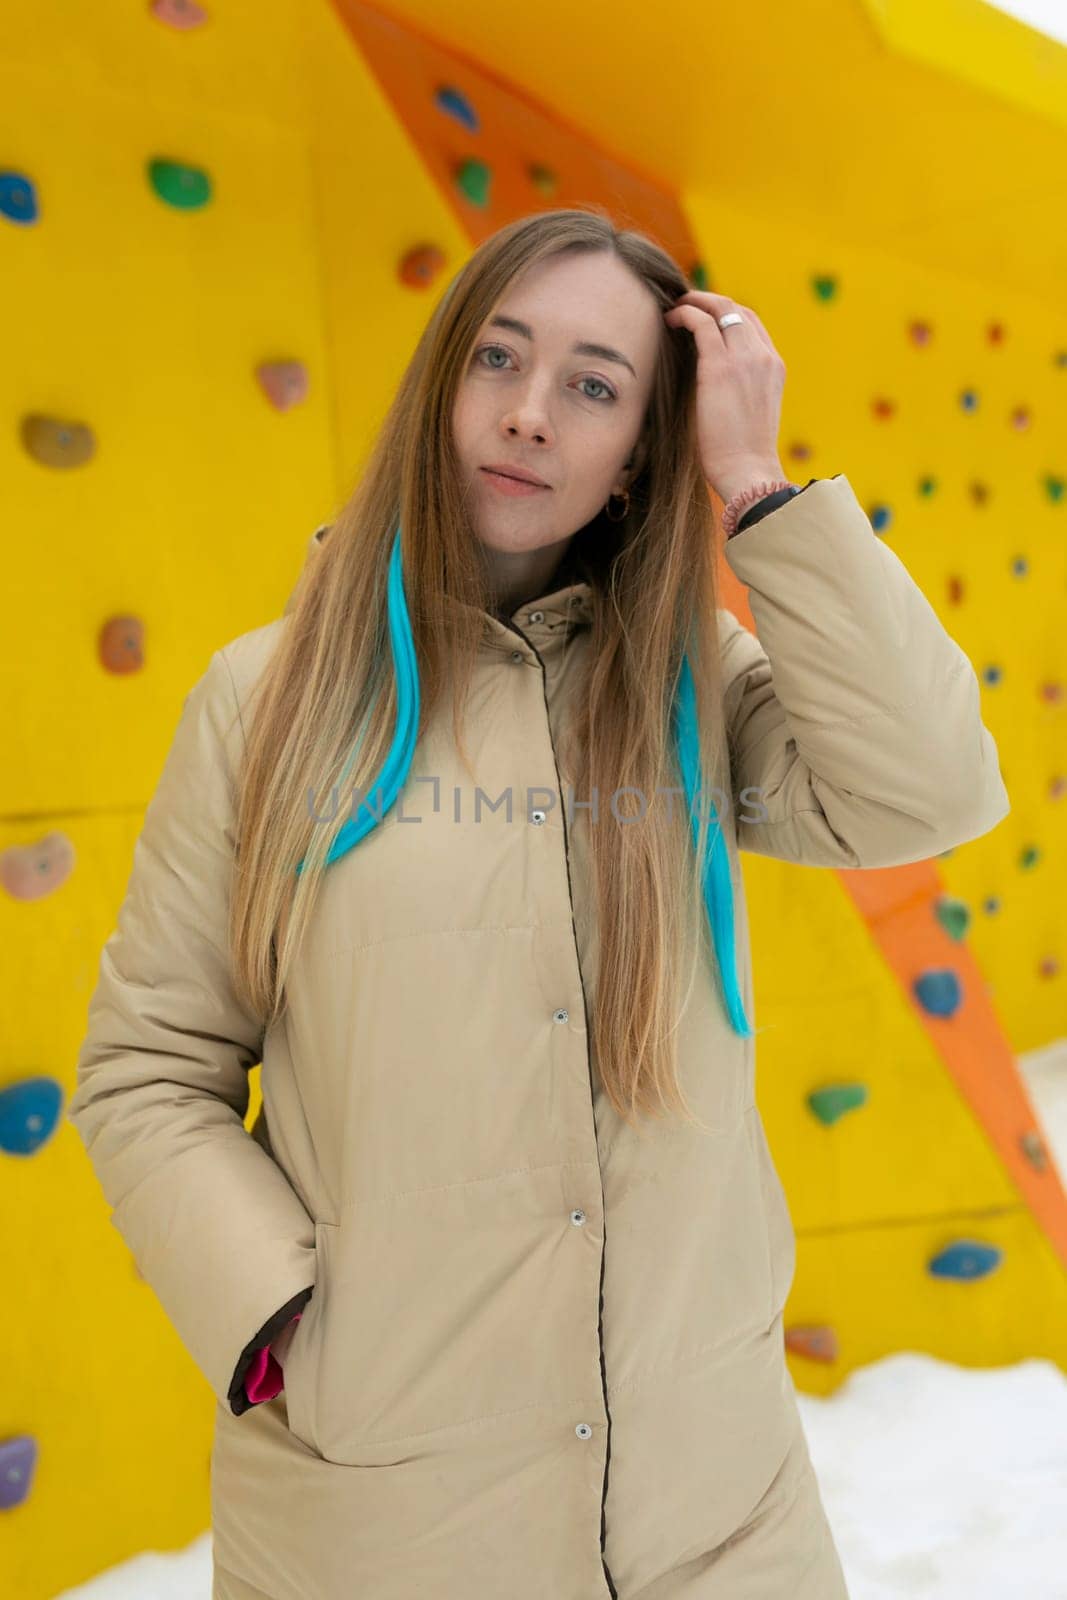 Woman With Long Hair Standing in Front of Climbing Wall by TRMK